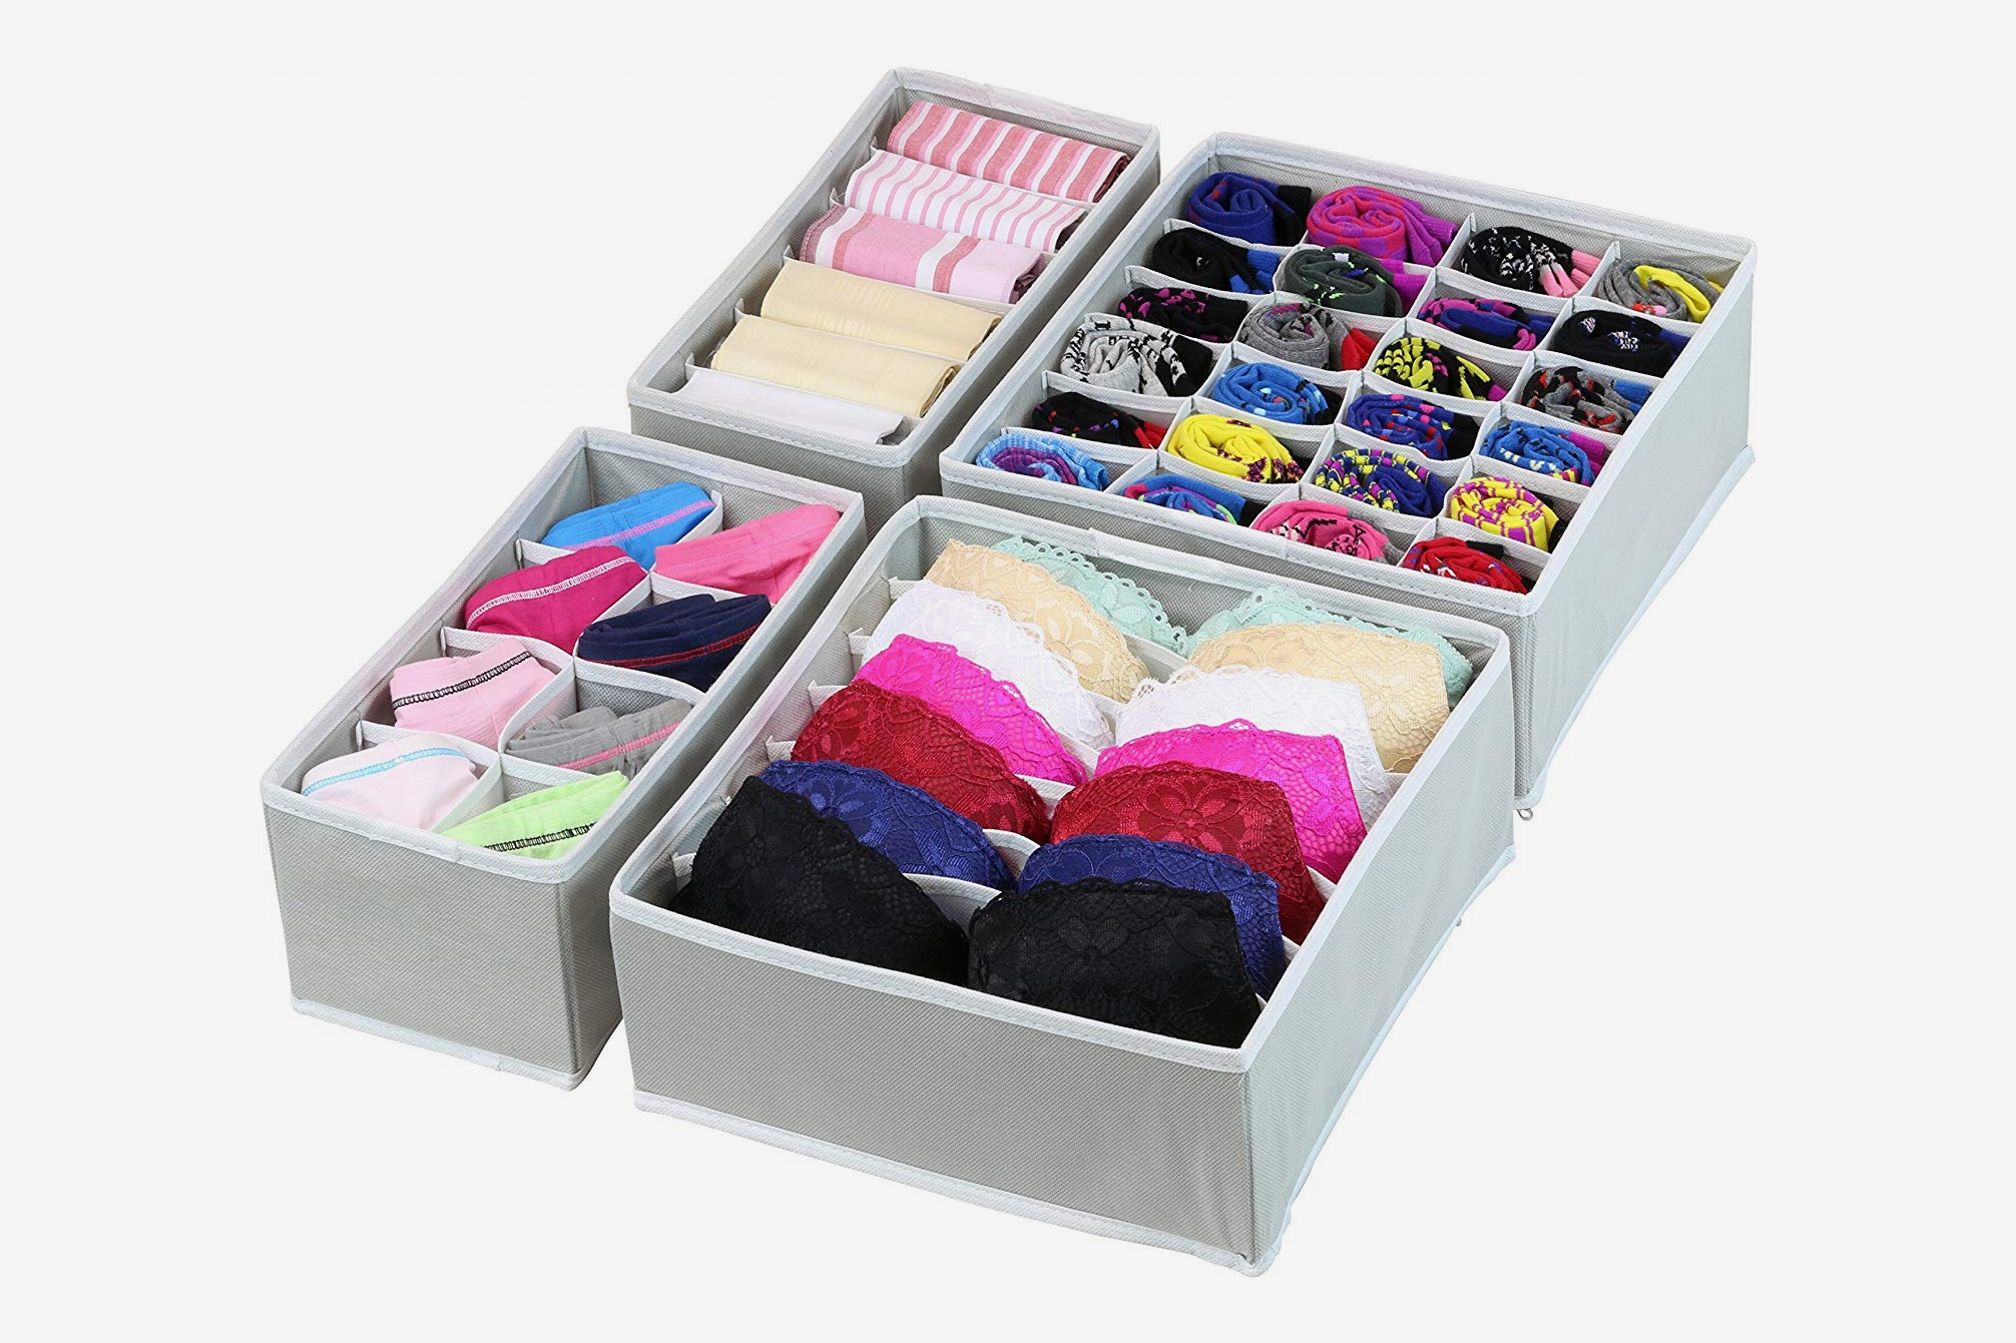 EJY01 EJY Collapsible Closet Organisers Drawer Dividers Bra Underwear Socks Storage Boxes for 30 Cell 